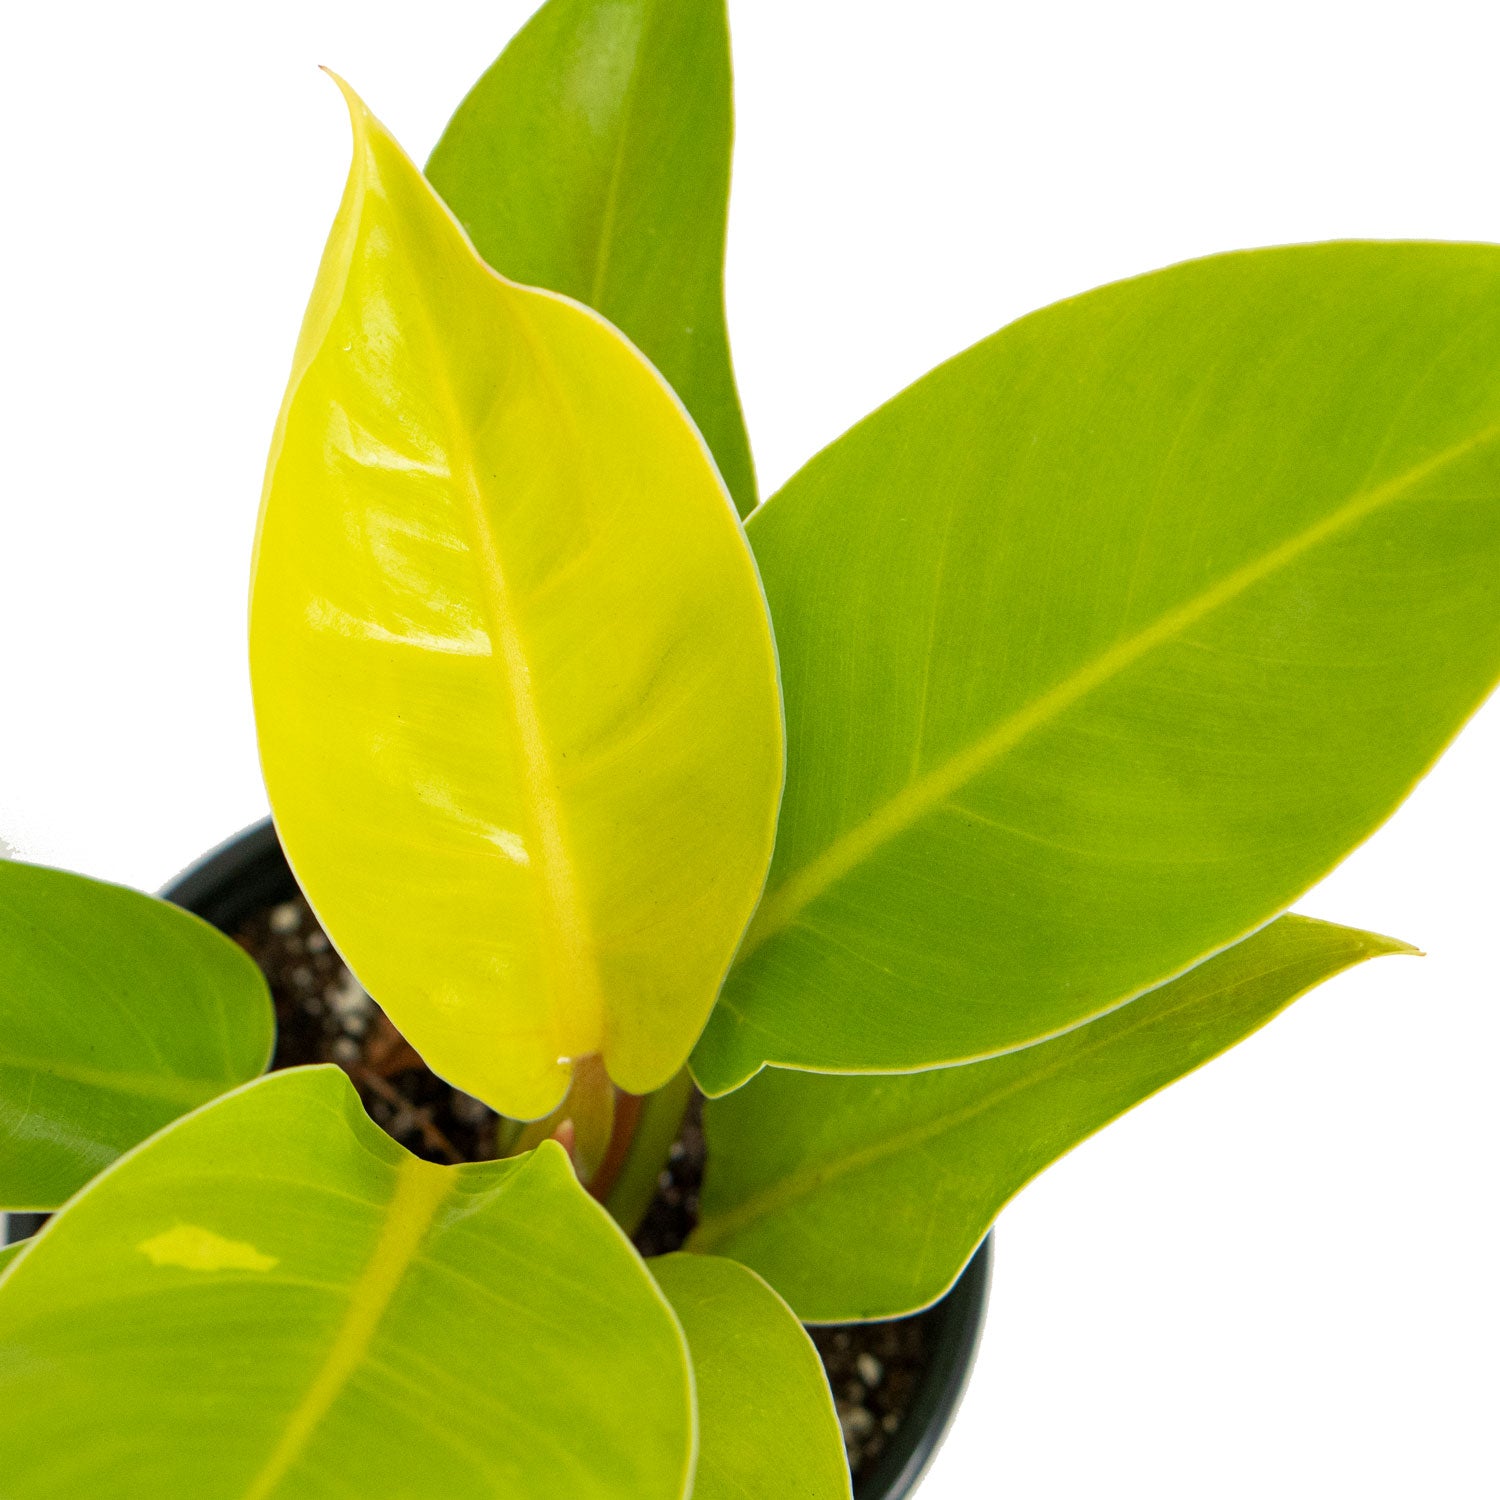 Leaves of Potted rare Houseplant Phillodendron Moonlight 4.5” - Buy repotted rare indoor plant Philodendron Moonlight for delivery at Planteia